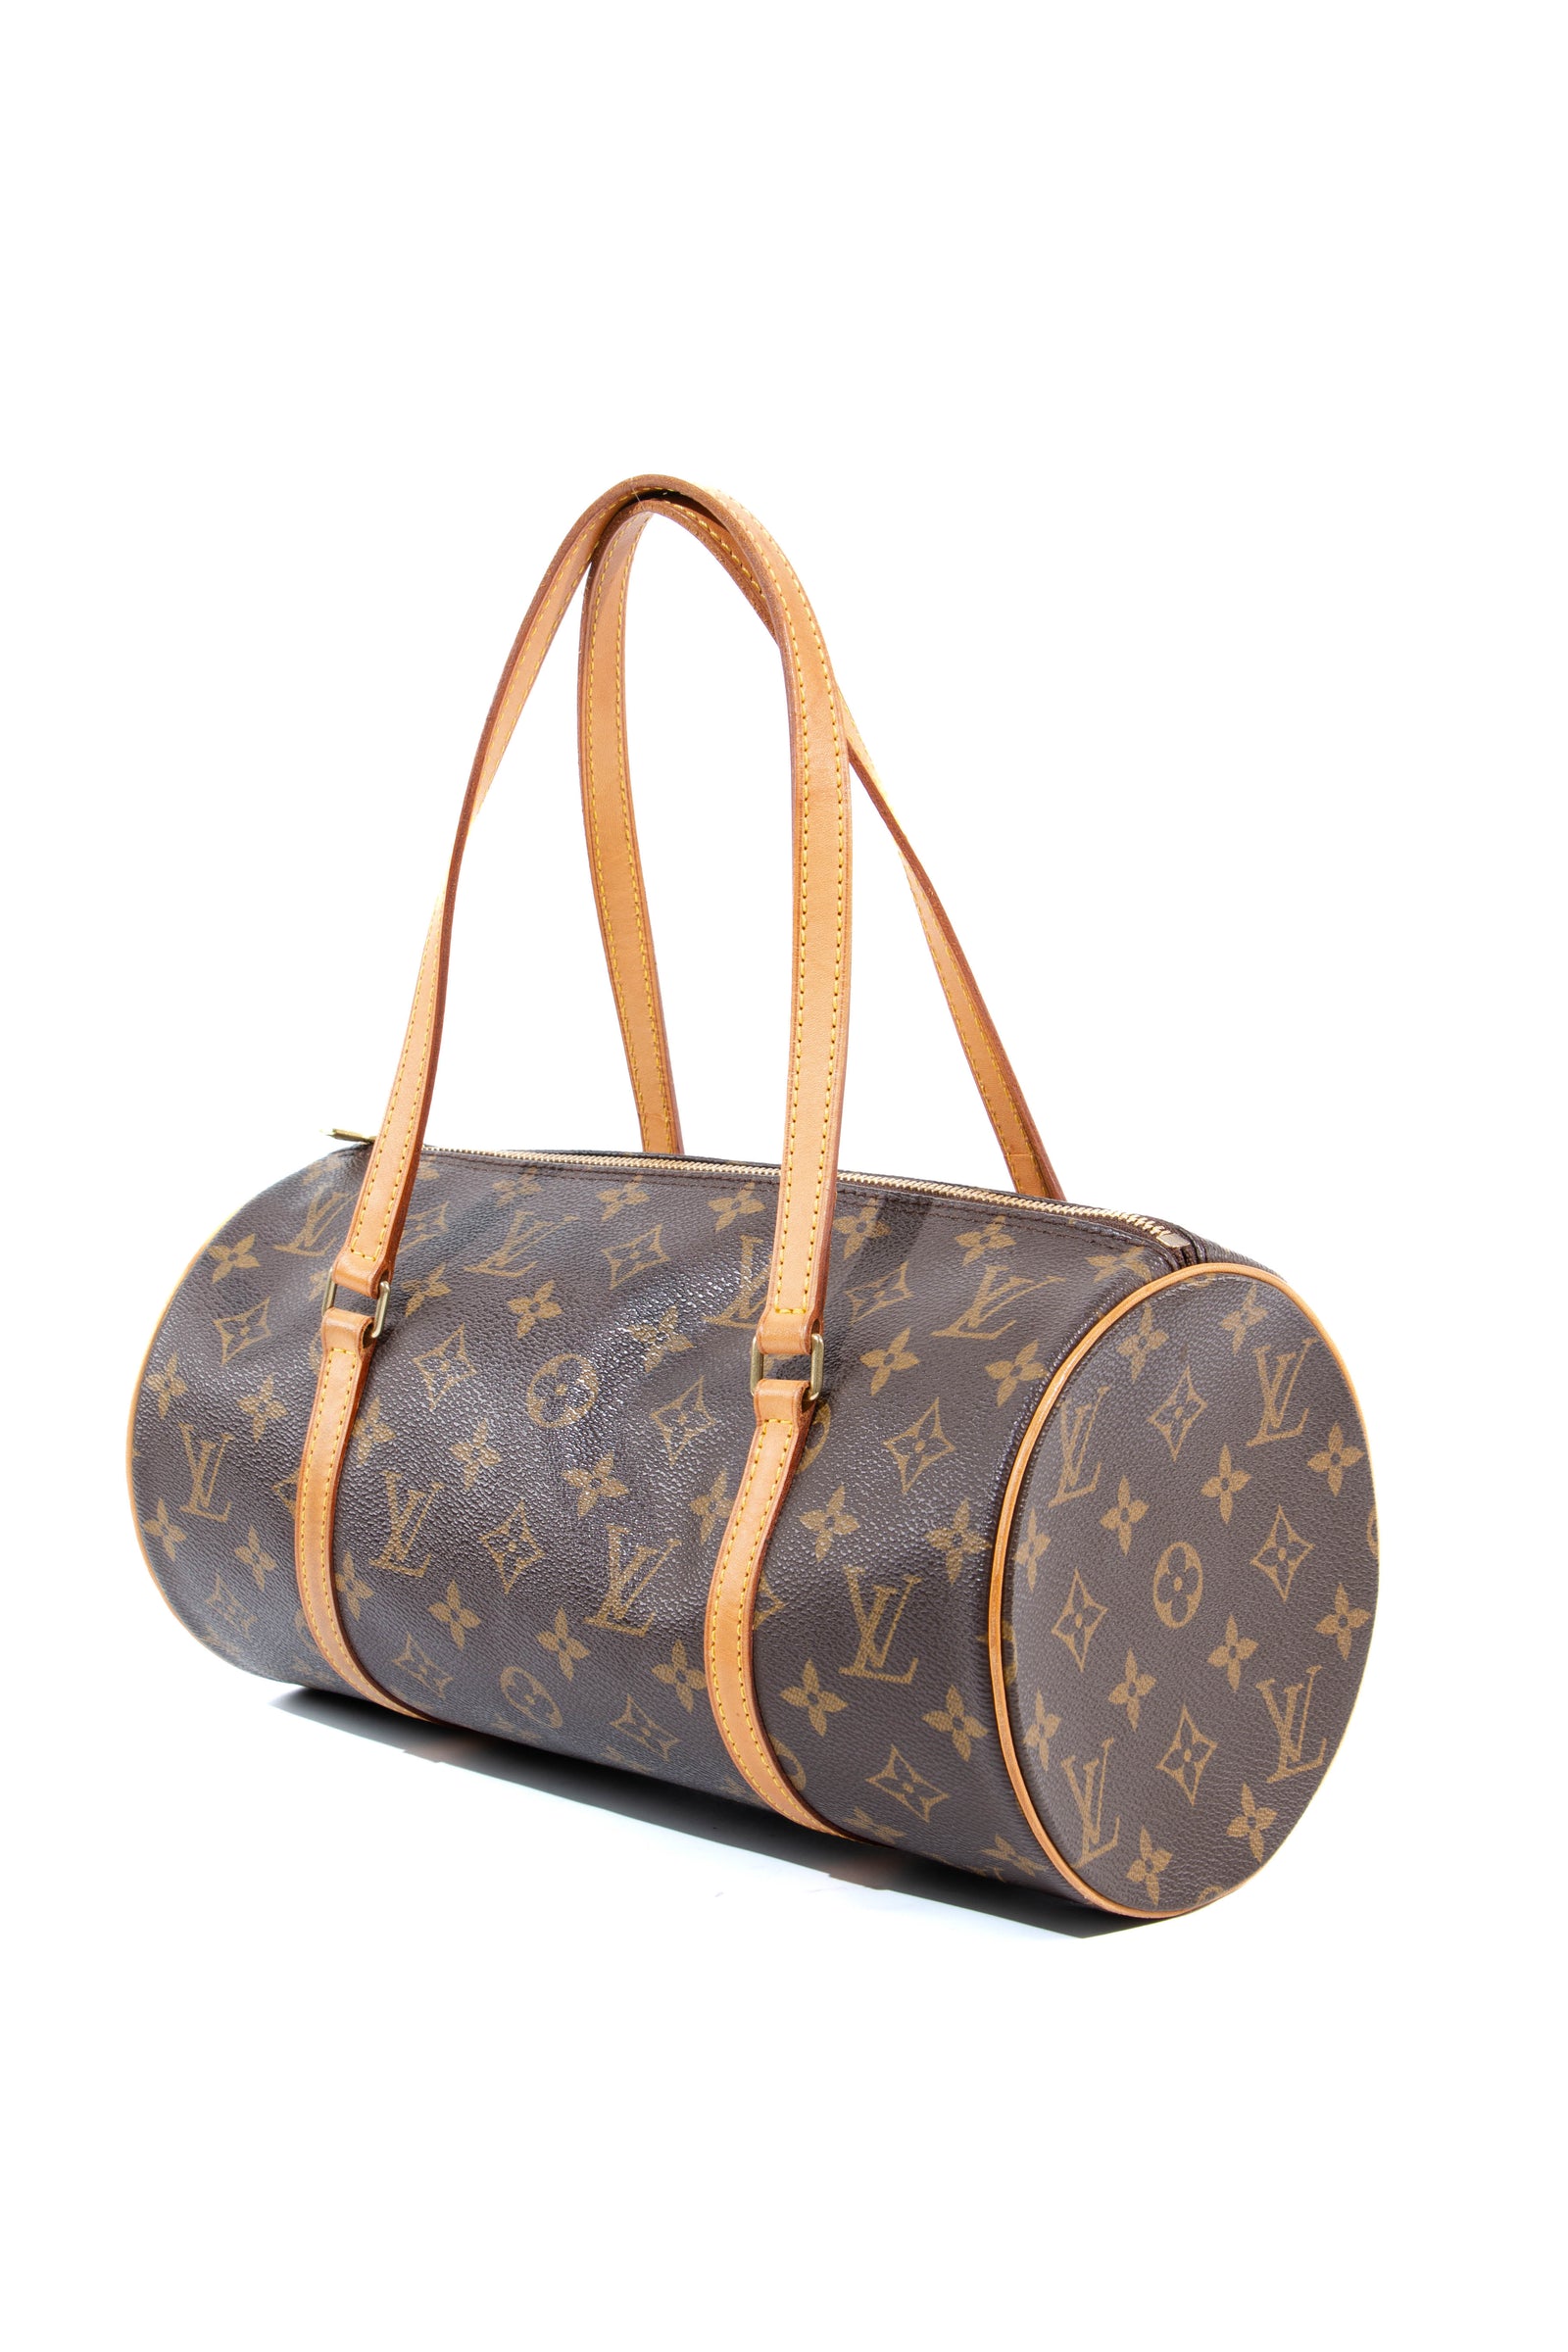 LOUIS VUITTON x Chapman Brothers, Keepall Bandouliere, Monogram Savane Ink  55 Midnight. Vintage Clothing & Accessories - Auctionet